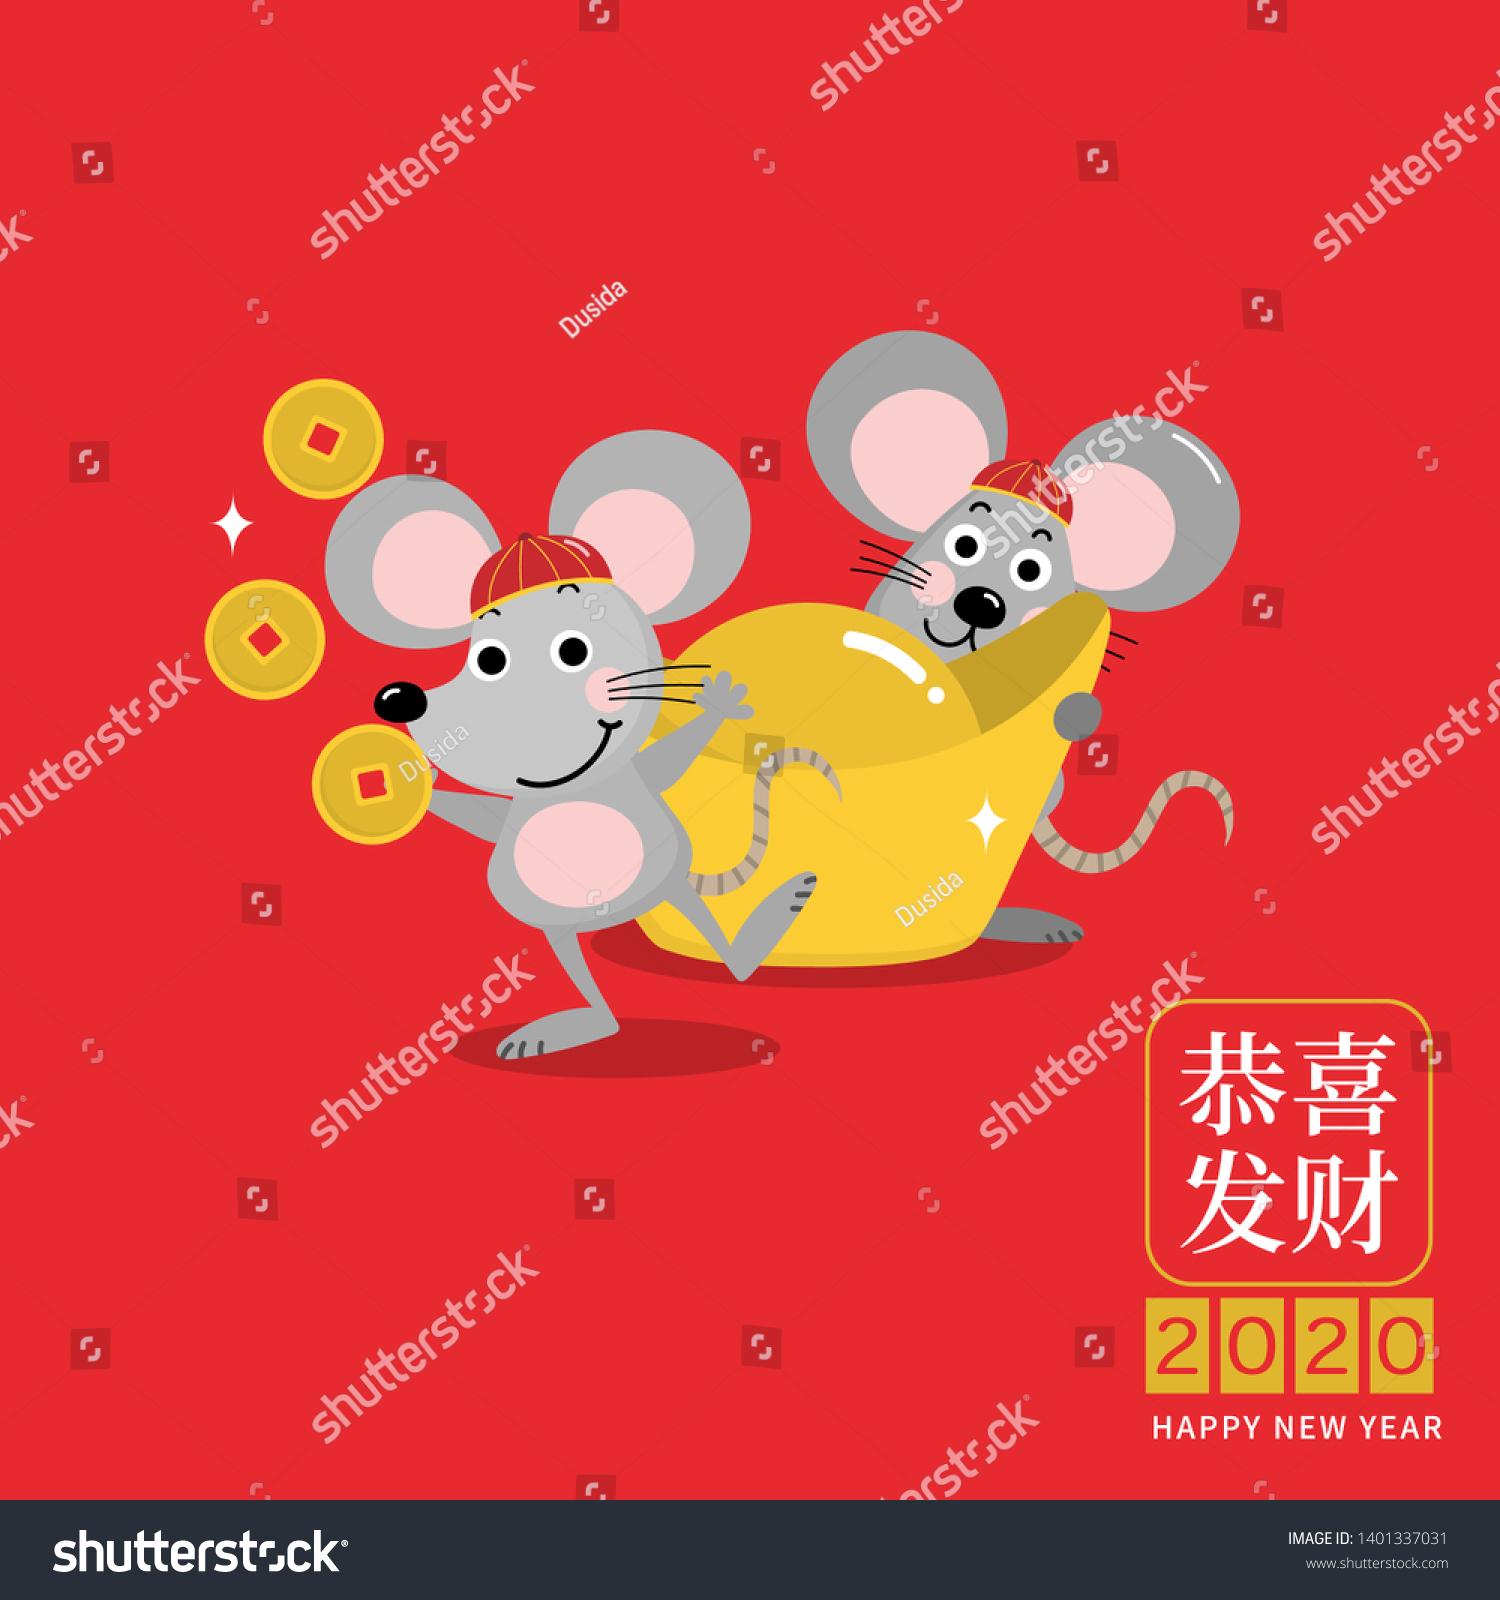 Happy Chinese New Year 2020 Greeting Stock Vector Royalty Free 1401337031